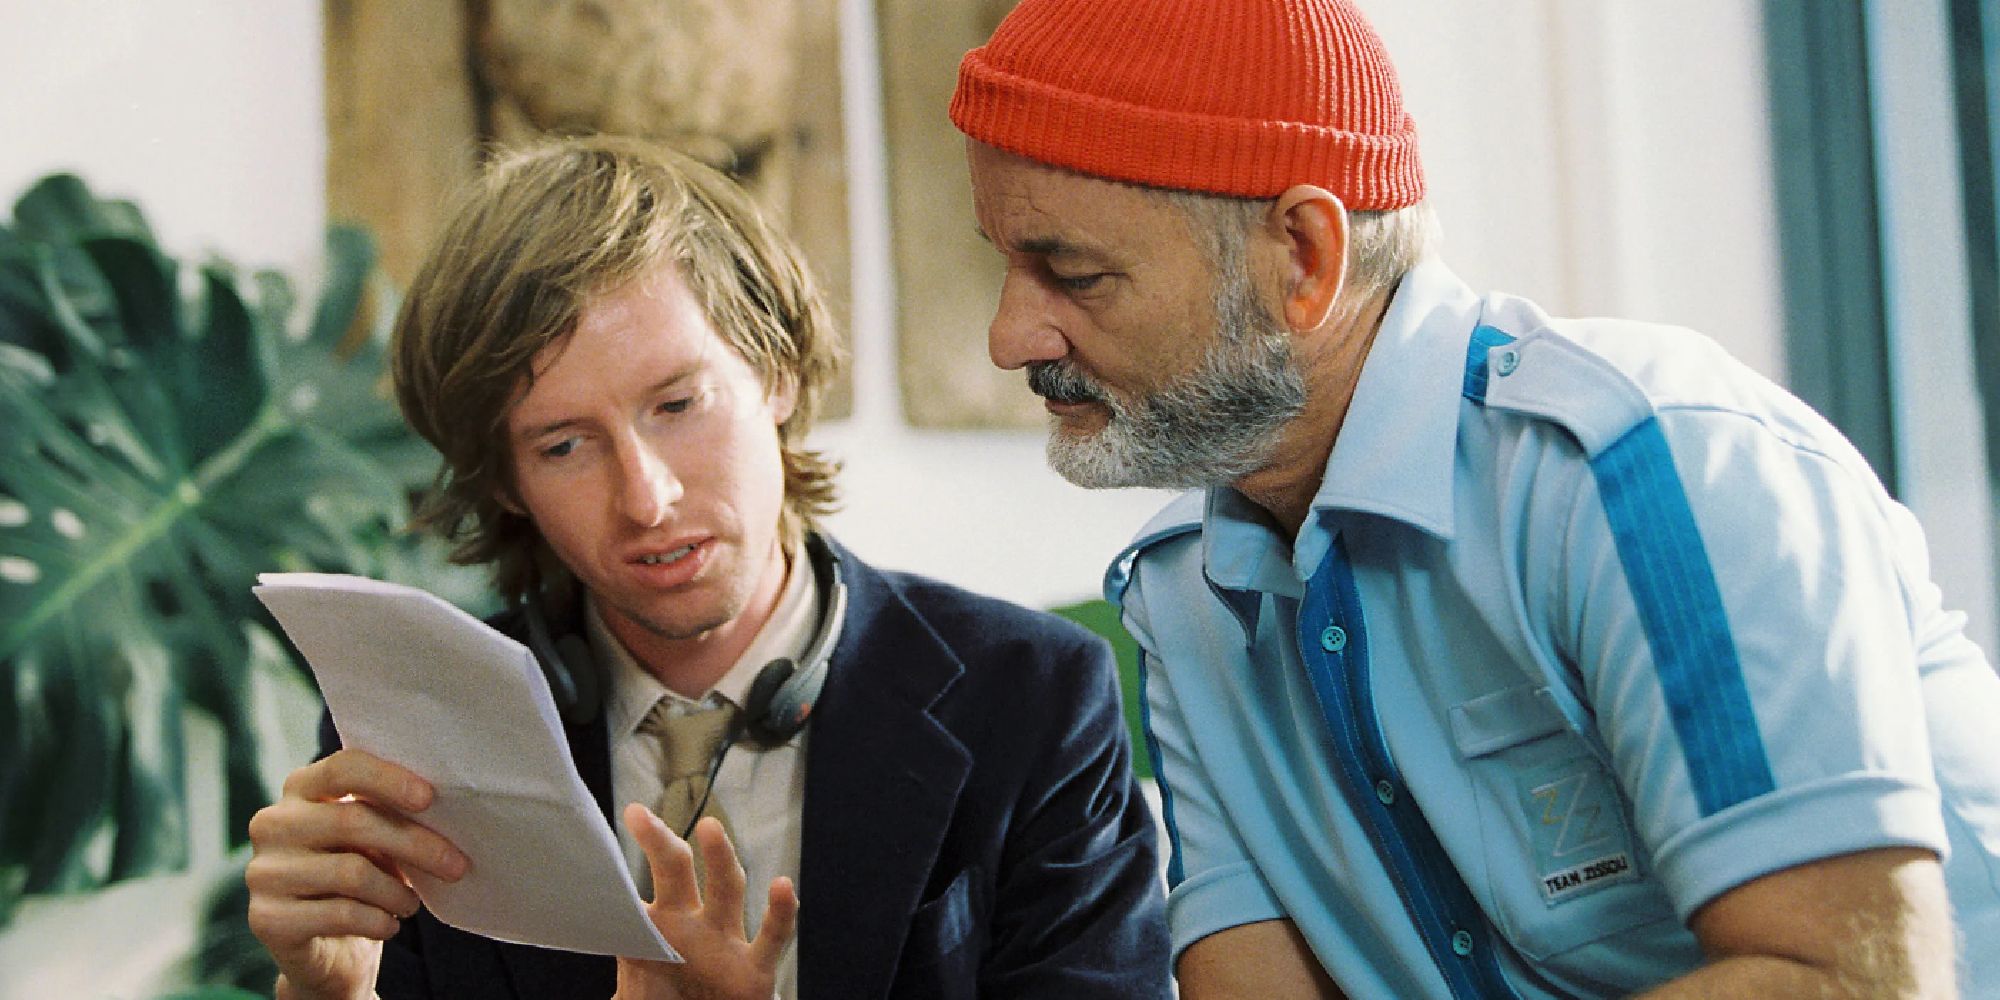 Wes Anderson directing